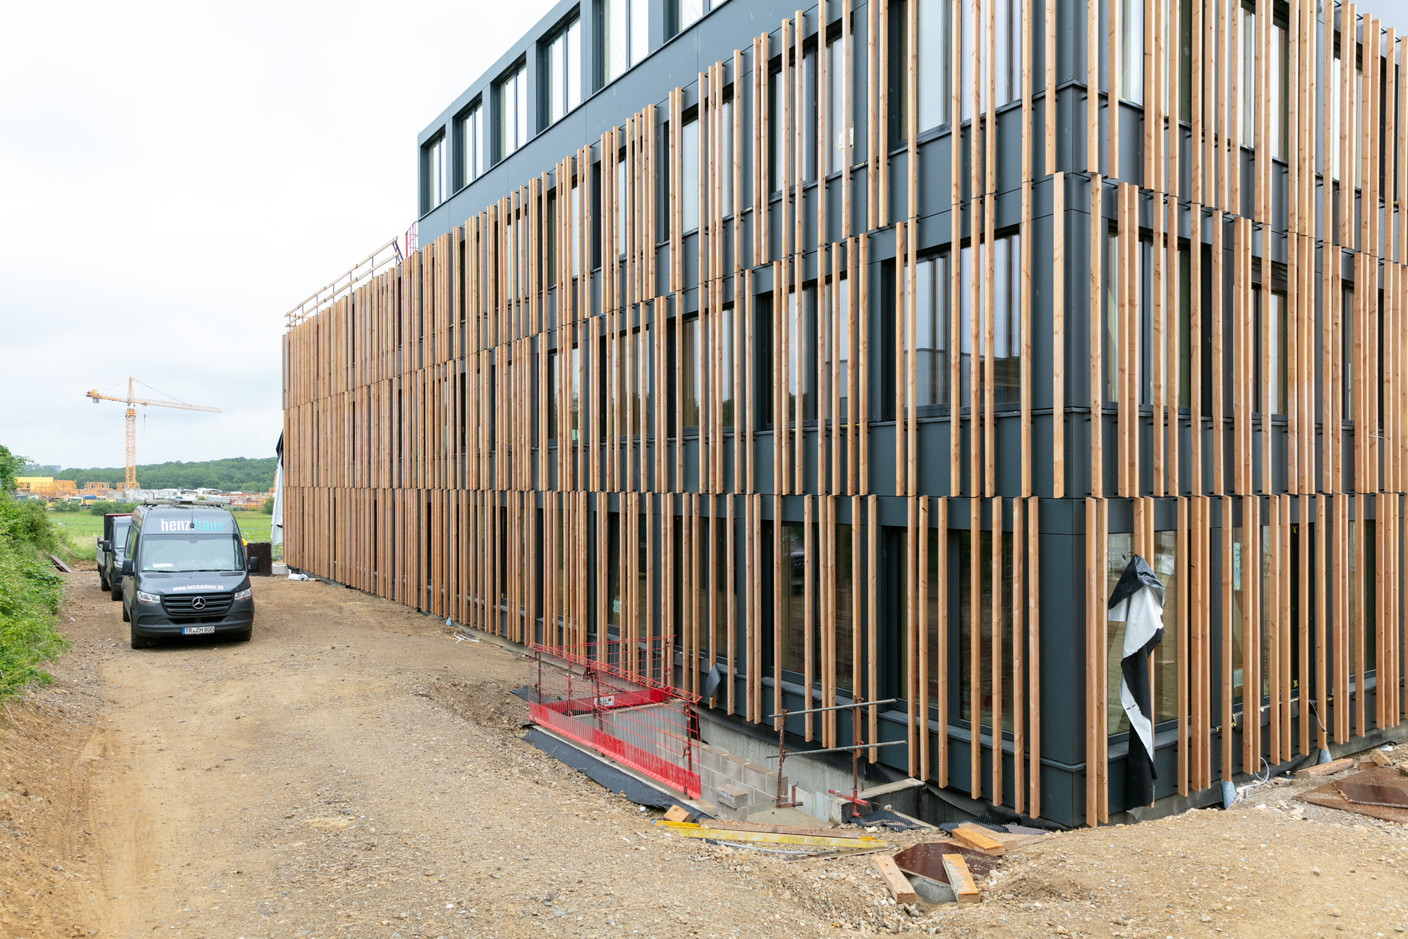 The cladding consists of vertical wooden slats. Photo: Romain Gamba / Maison Moderne